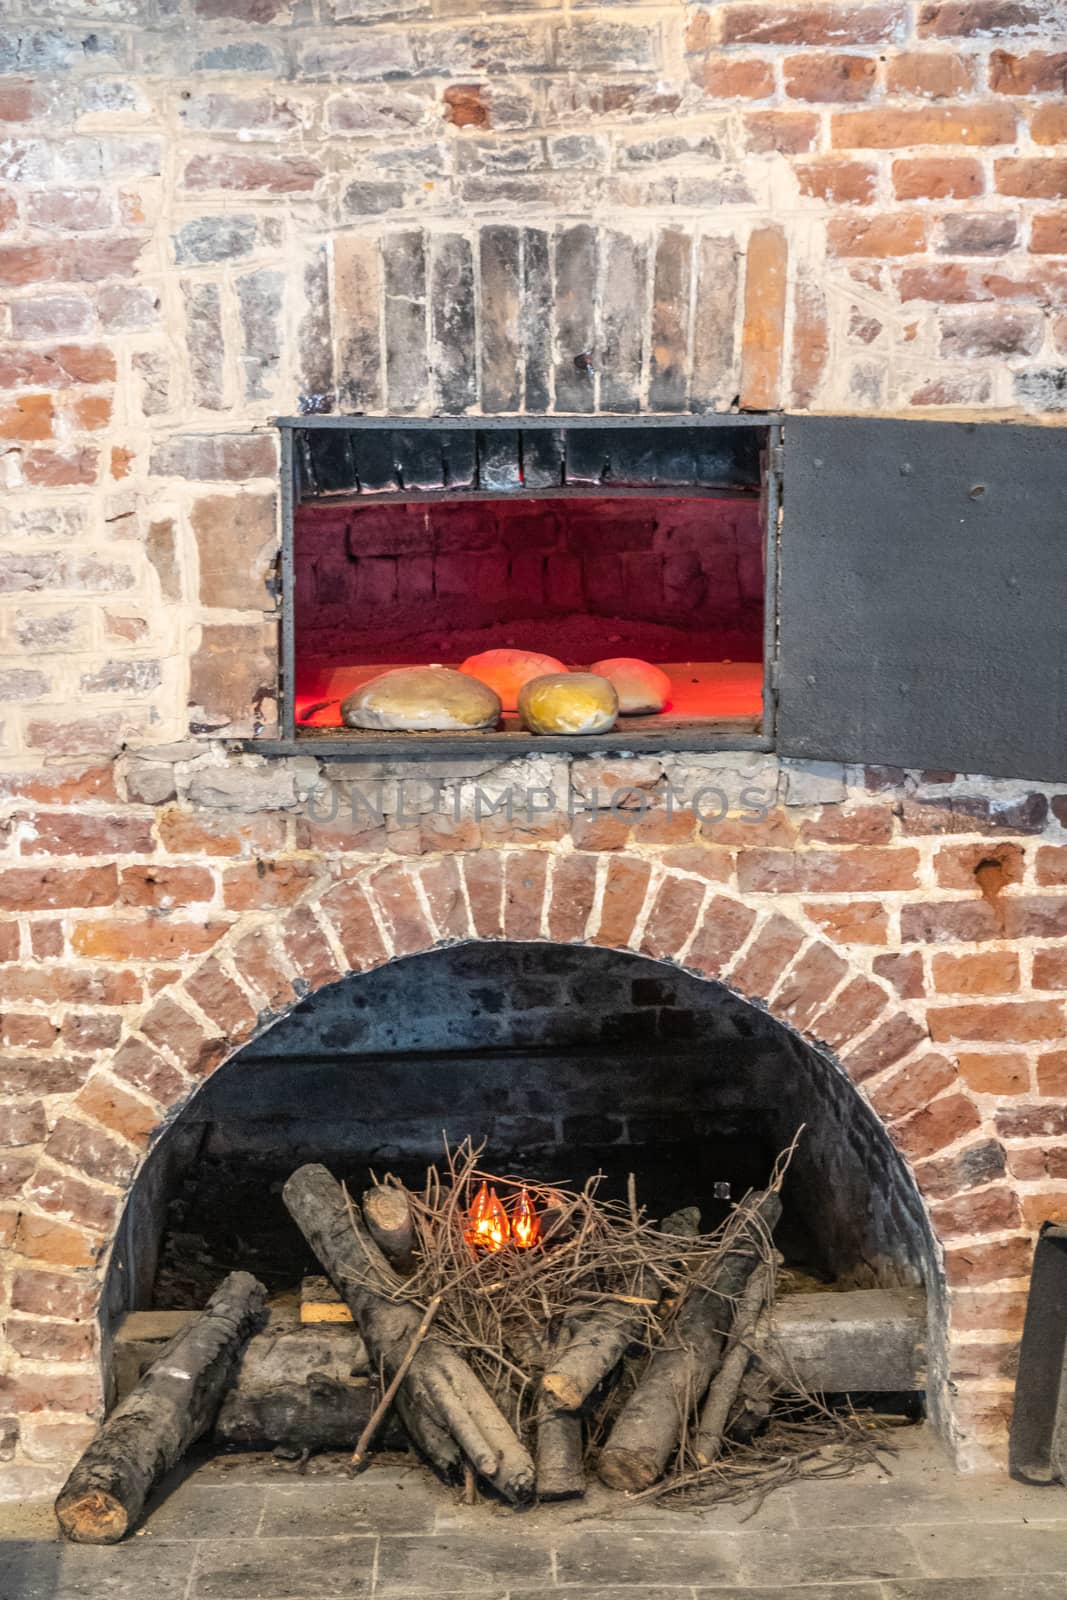 Dinant, Belgium - June 26, 2019: Inside Citadelle. Part of historic bakery with focus on one of the bread baking ovens, set in brick wall and wood fire.